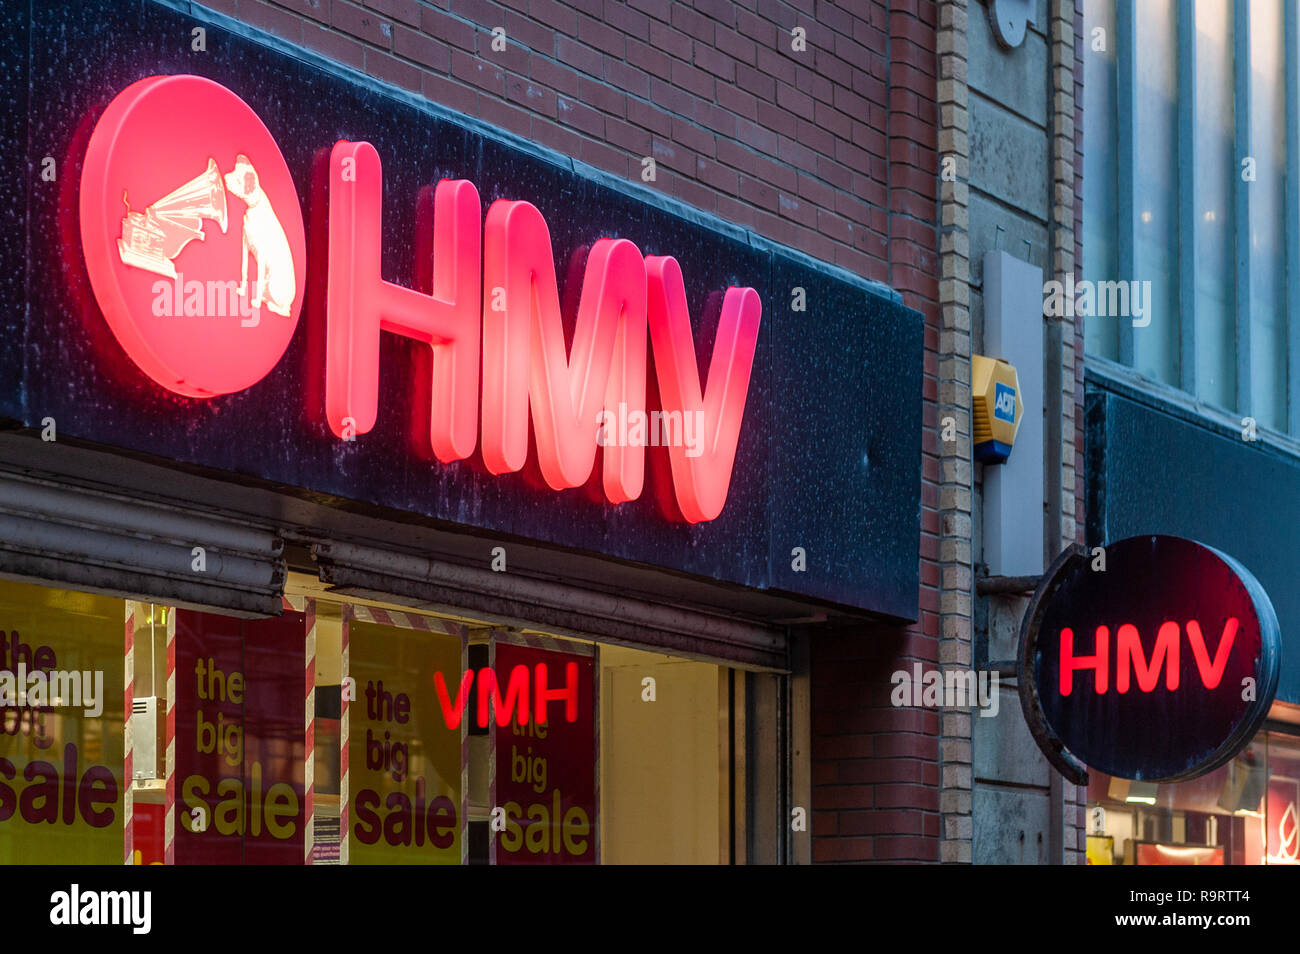 Blackpool, UK. 28th Dec, 2018. HMV store front, Blackpool, as the national chain is facing administration this week, putting 2,200 jobs at risk. The chain, which operates 130 stores, has fallen victim of online streaming services. Credit: AG News/Alamy Live News Stock Photo